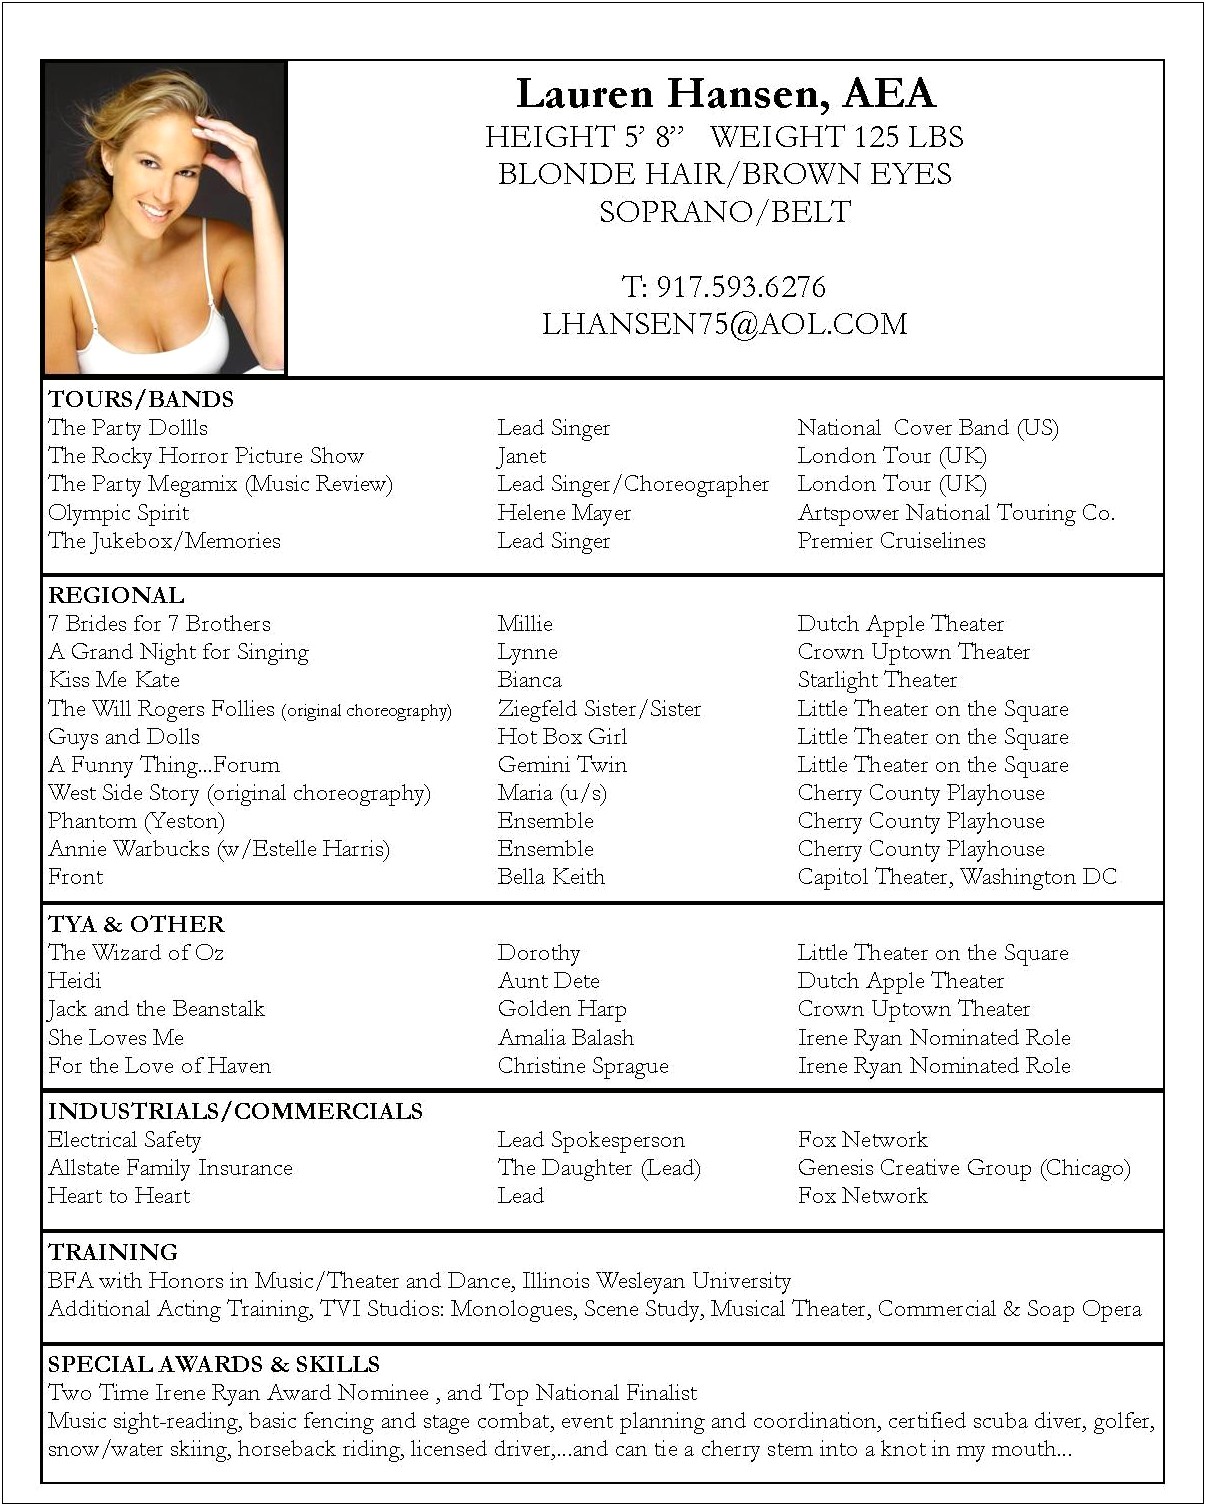 Samples Of Acting And Modeling Resume